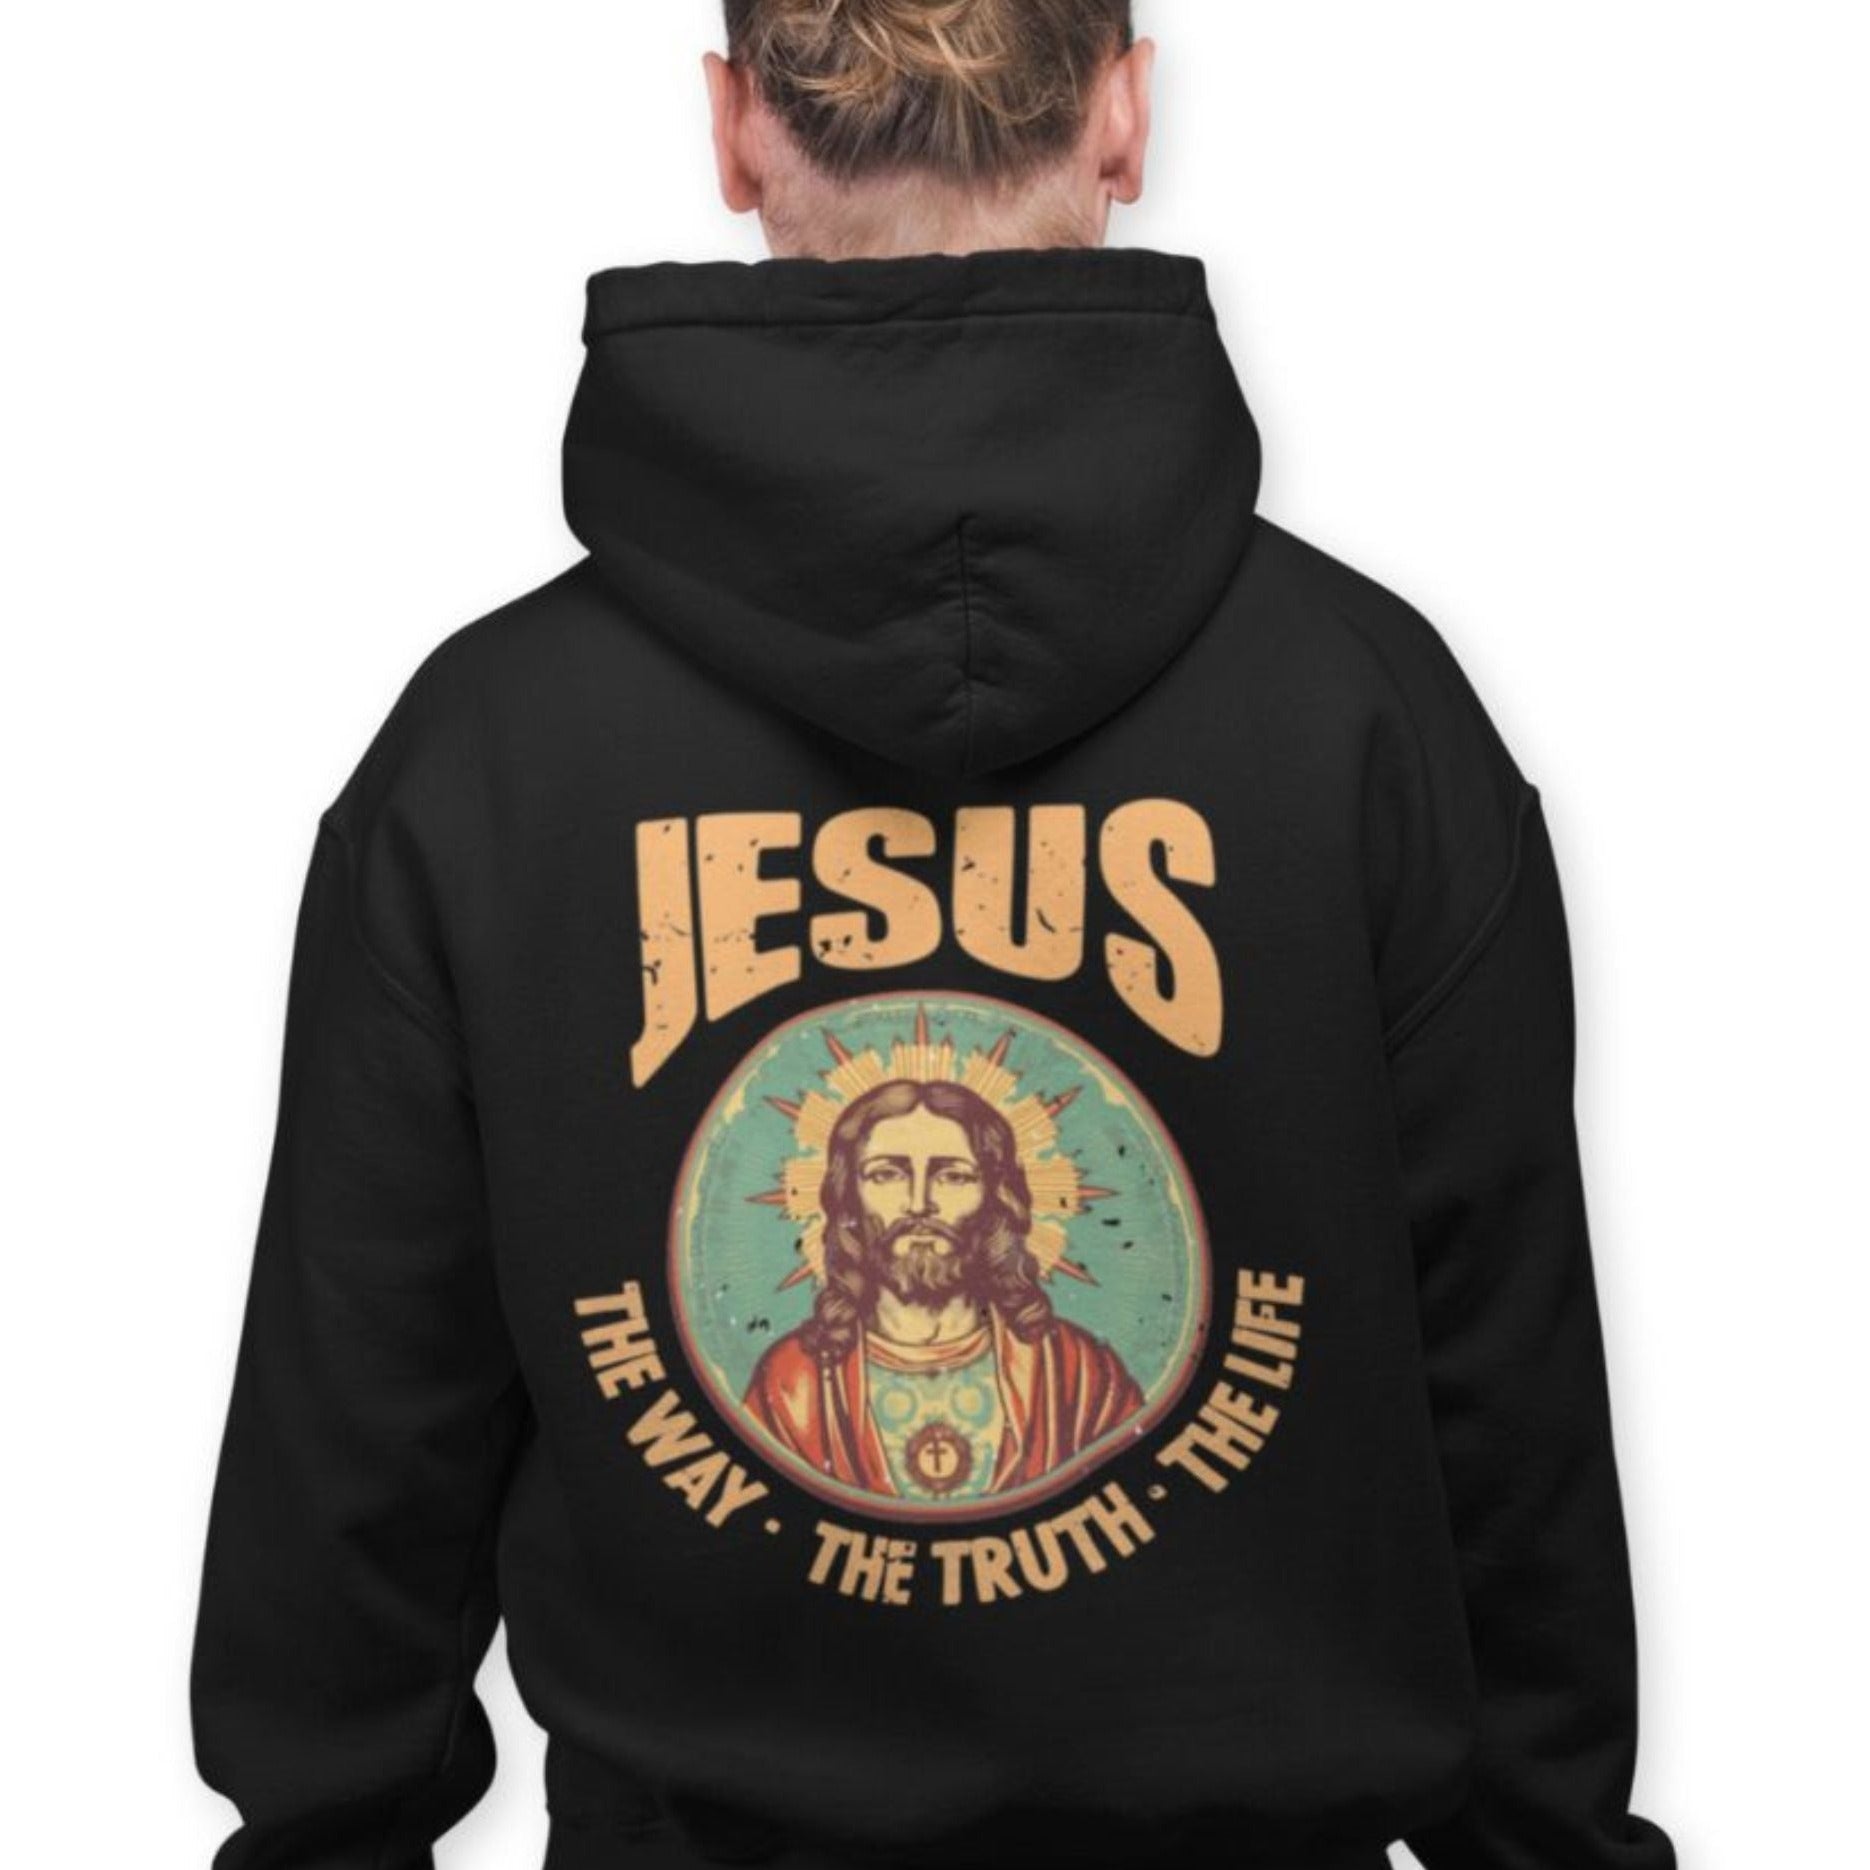 Jesus - The Way, Truth, Life Retro-Inspired Premium Men's Jacket Heavy Blend™ Hooded Size: S Color: Red Jesus Passion Apparel